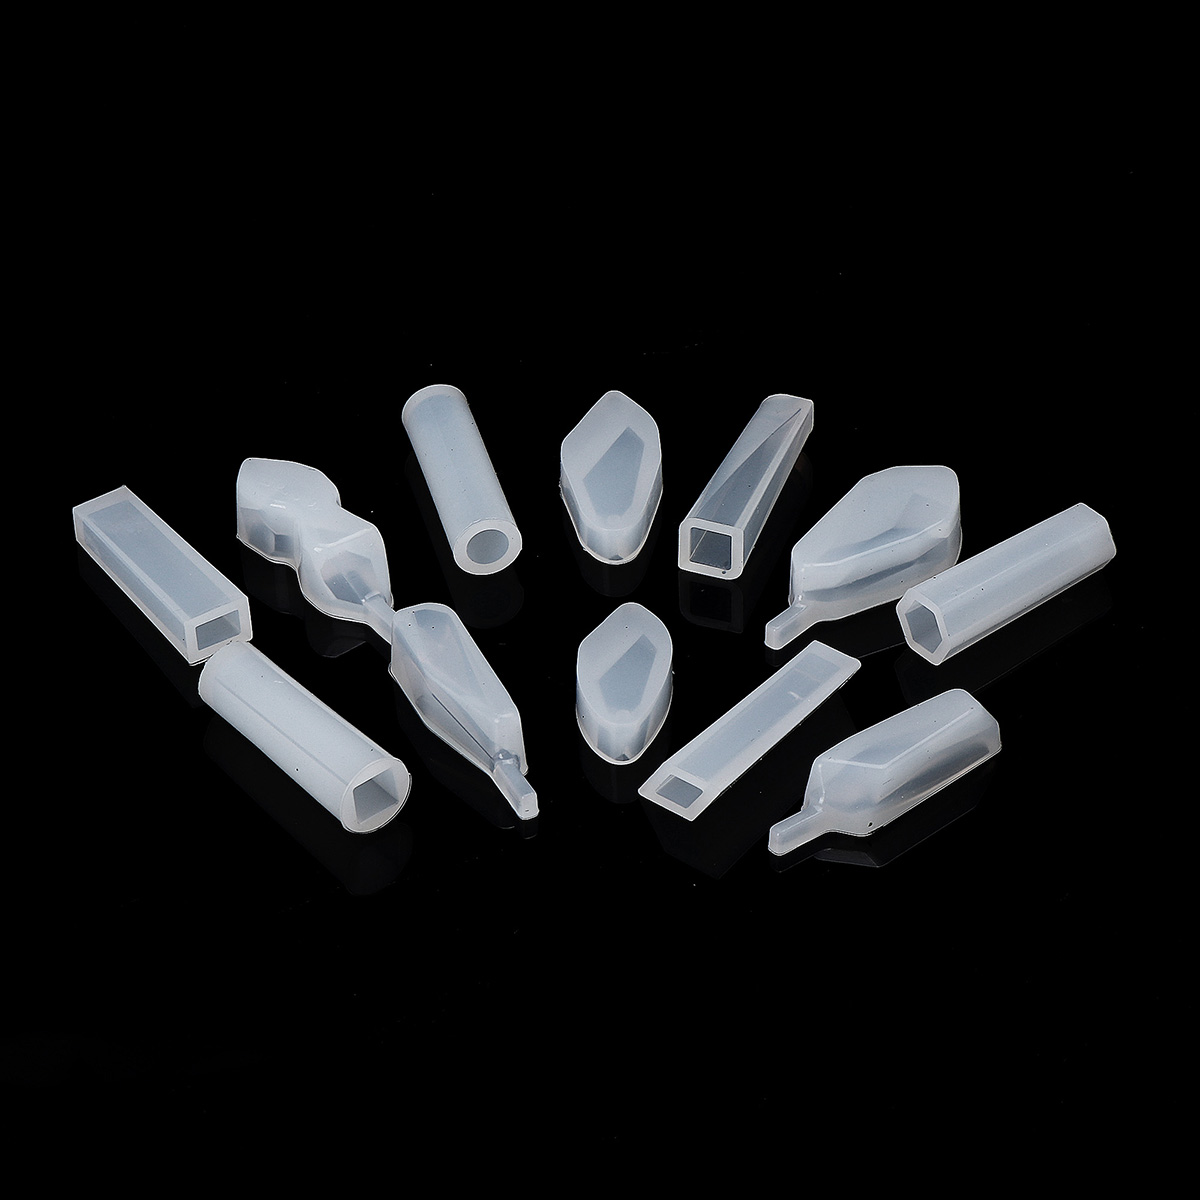 118PCS-DIY-Crystal-Glue-Resin-Silicone-Jewelry-Molds-Project-Gift-Pendant-Decoration-Mould-Tools-Set-1664749-8